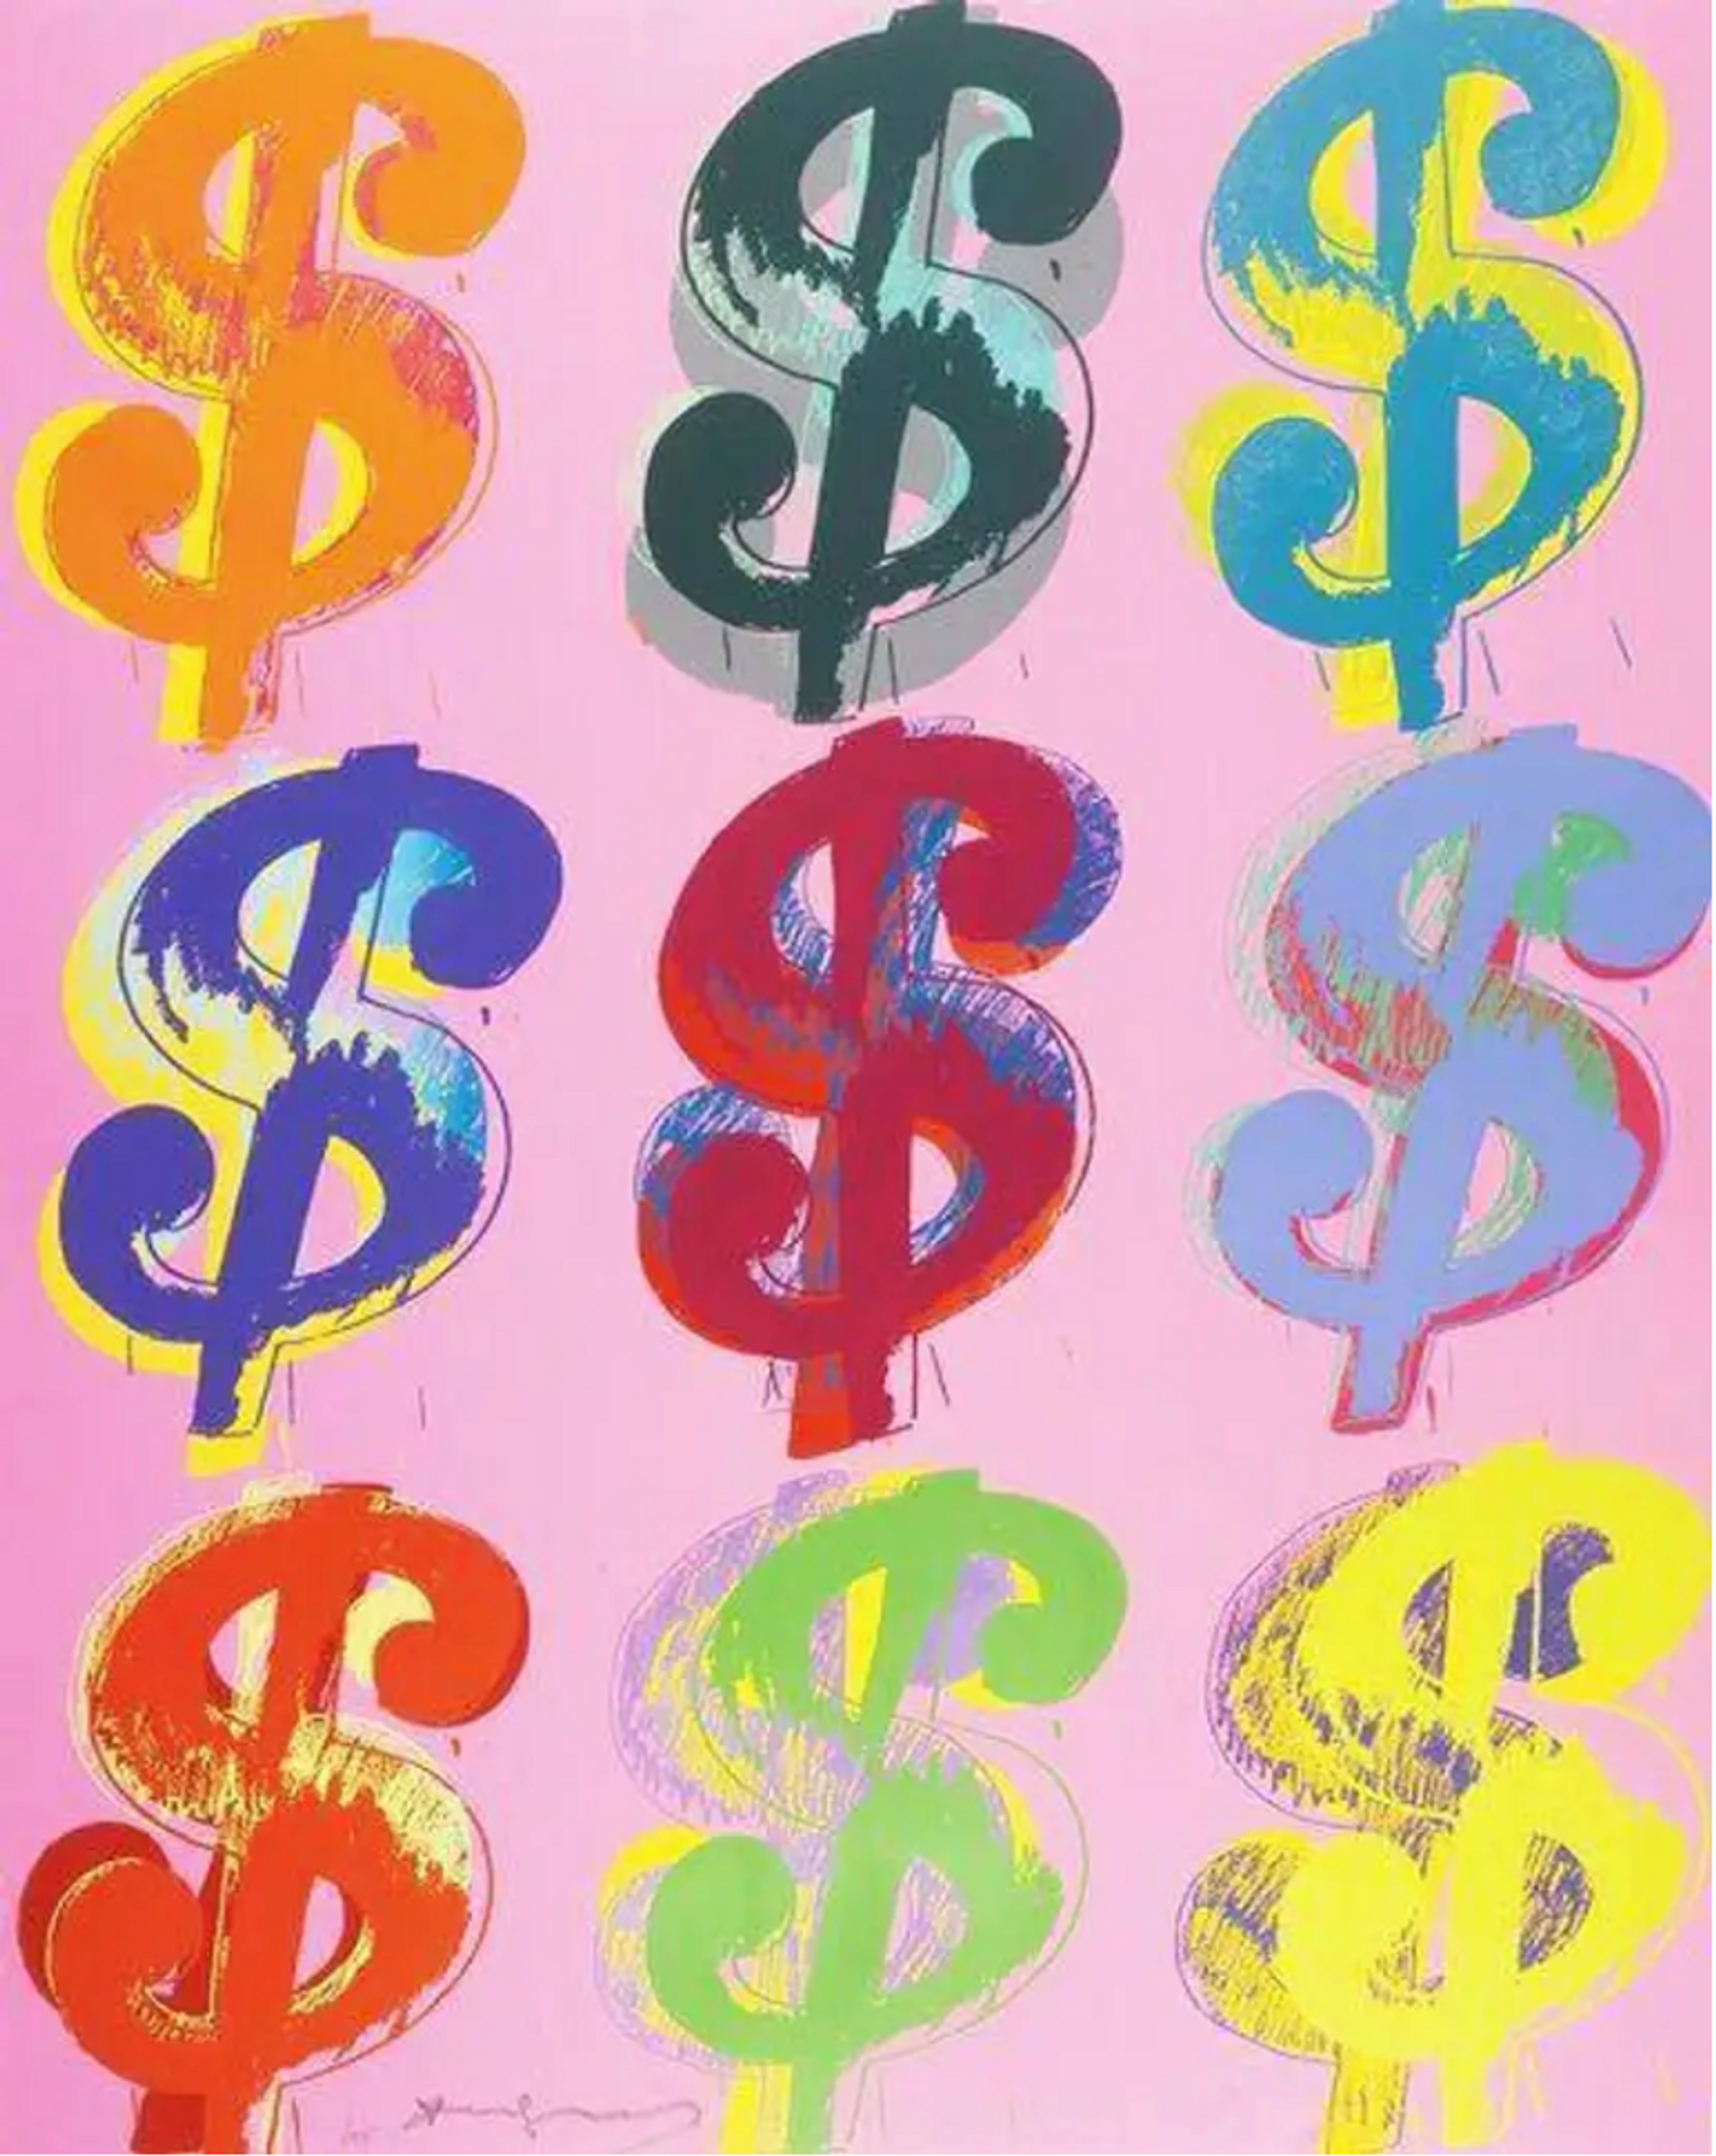 Dollar Sign 9 (F. & S. II.285) by Andy Warhol